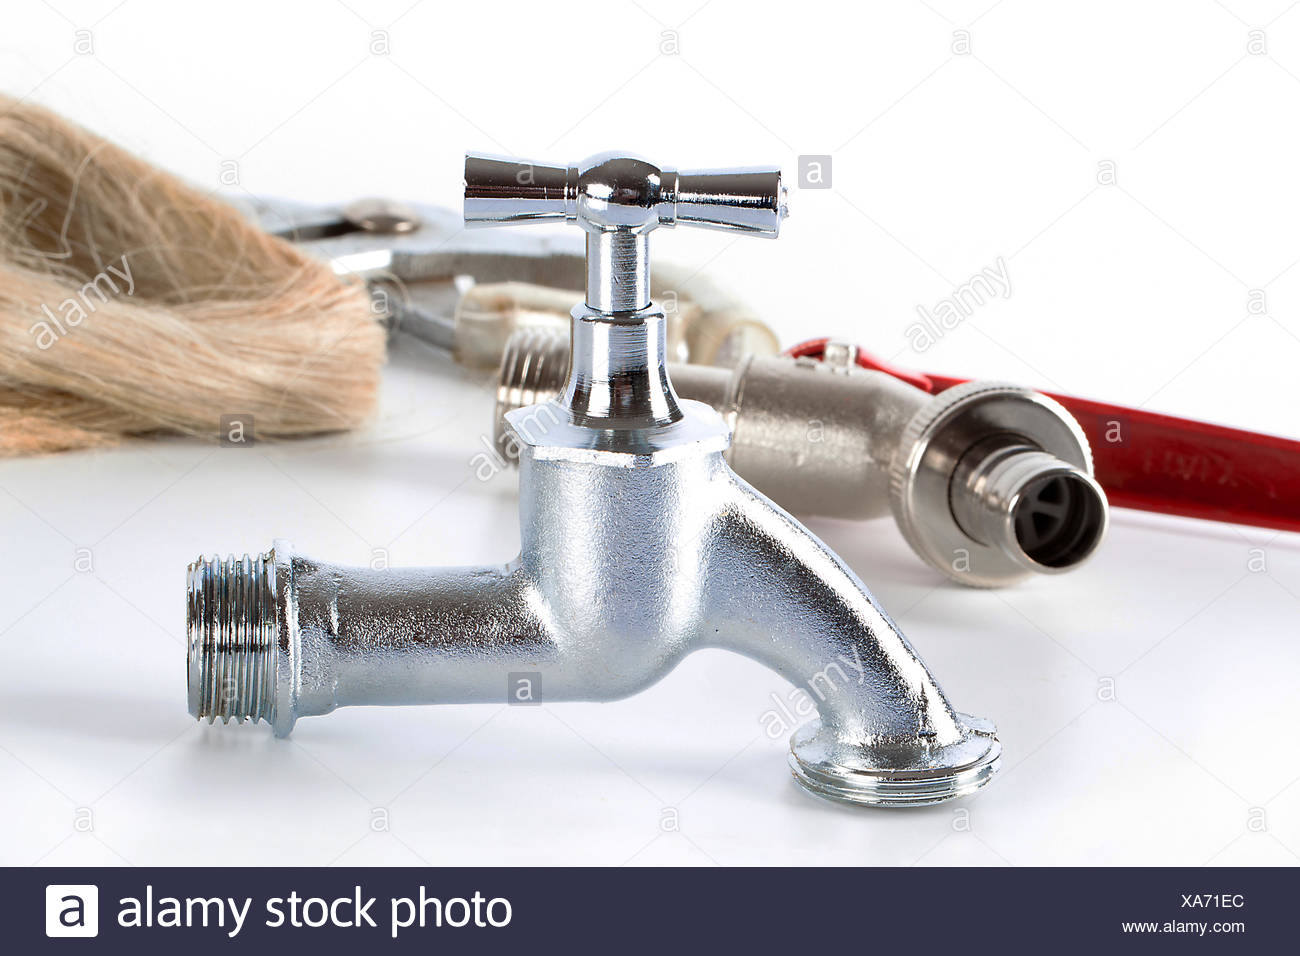 Faucet Water Supply Spare Parts Stock Photo 281667300 Alamy